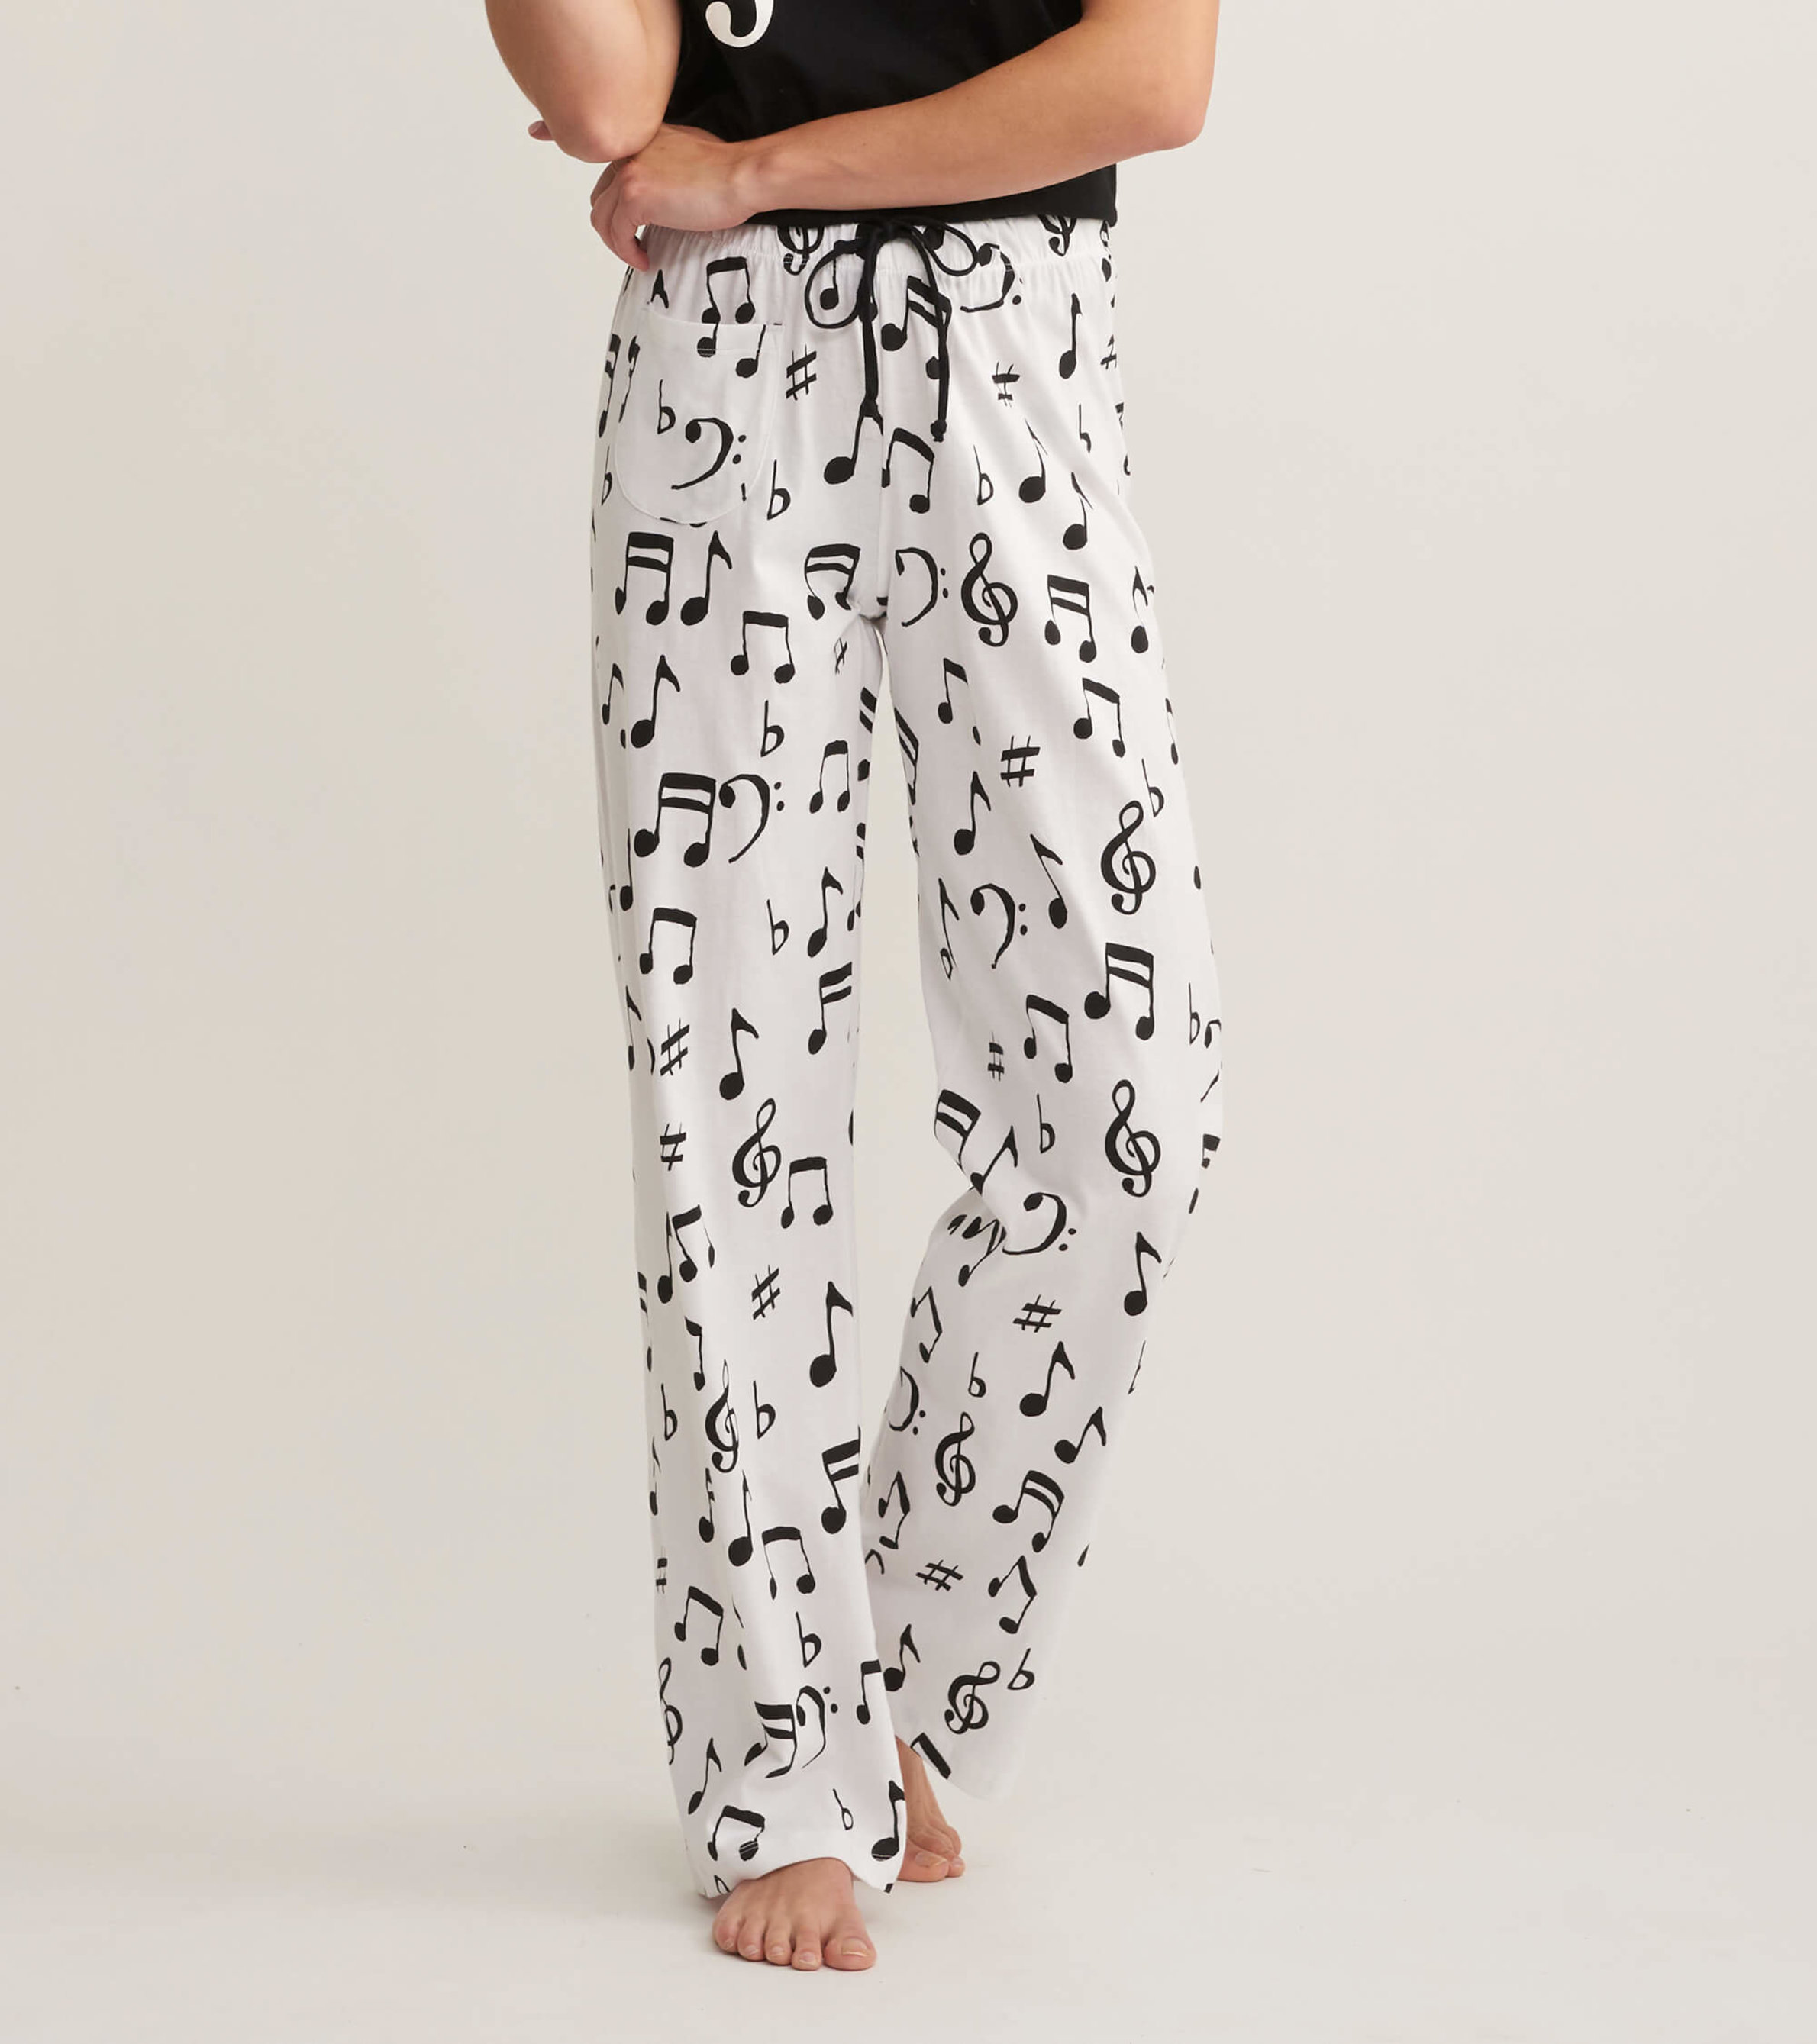 Find your perfect Pajama bottoms here